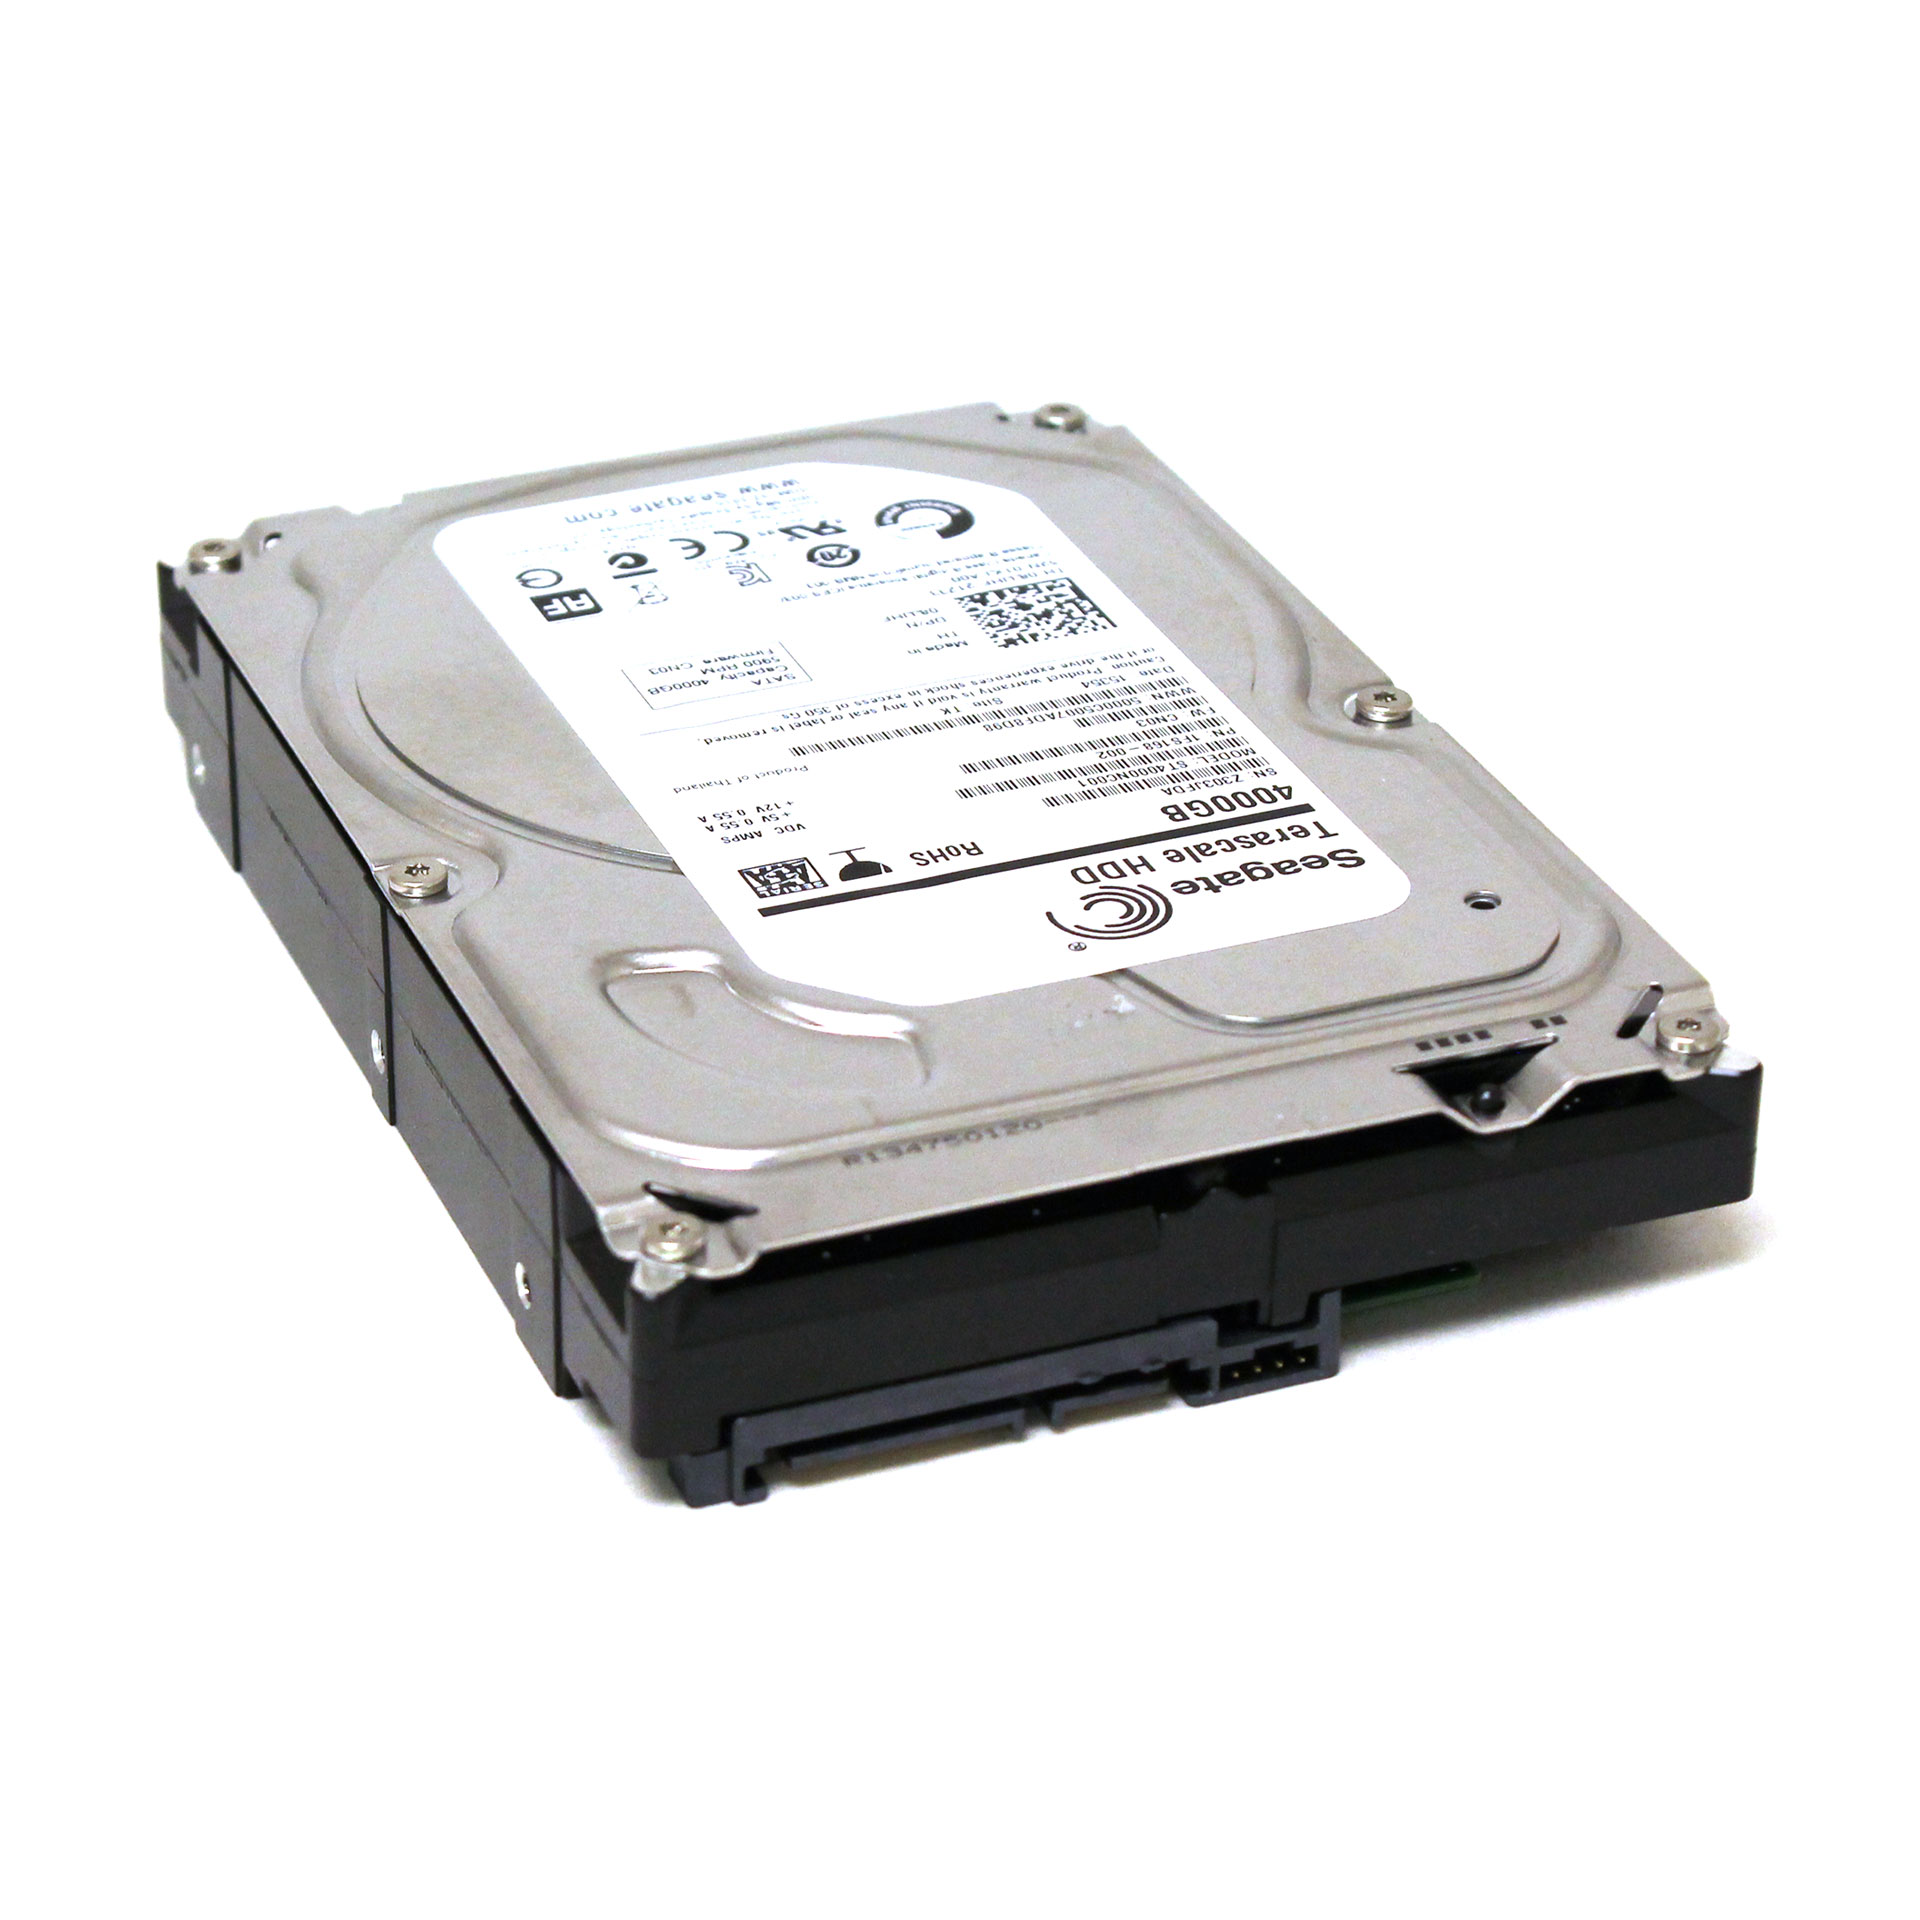 Ubevæbnet Syndicate fødselsdag Seagate Terascale Hard Drive 4TB 3.5 SATA 6Gb/s 5900rpm 64MB Compeve  Compenet Seagate Terascale Hard Drive 4TB 3.5 SATA 6Gb/s 5900rpm 64MB  [ST4000NC001] - $187.20 : Professional Multi Monitor Workstations, Graphics  Card Experts